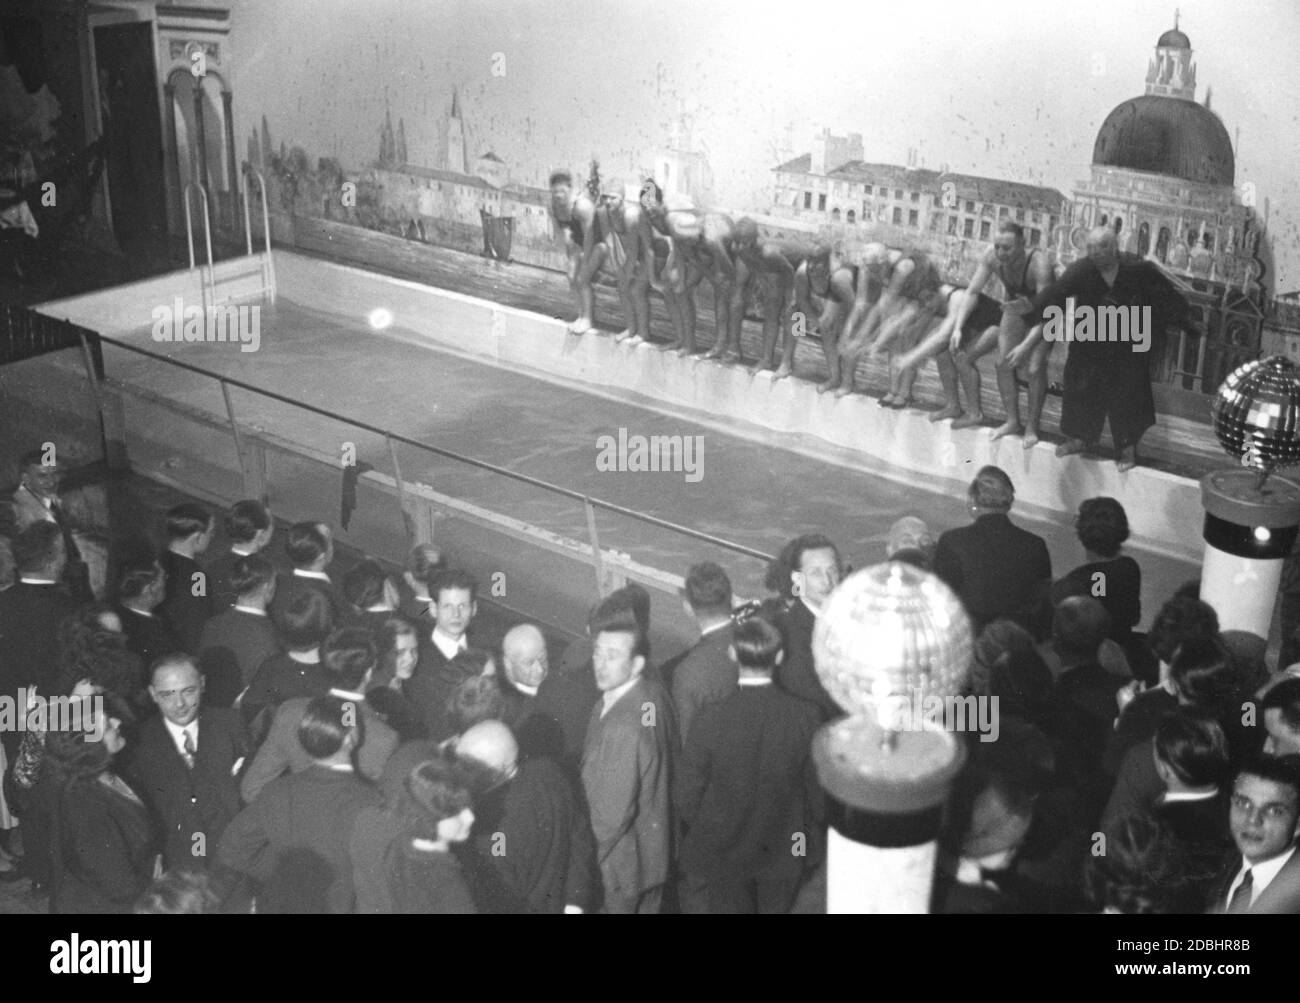 'In the new Tanzpalast (''Dance Palace'') in Berlin-Mitte, the former Altes Ballhaus in Joachimstrasse, a swimming pool was built as an attraction, from the edge of which some swimmers want to jump into the water. On the left, some guests watch from the dance floor. The trend of bathing in dance palaces was taken over from Paris. The picture was taken in 1931.' Stock Photo